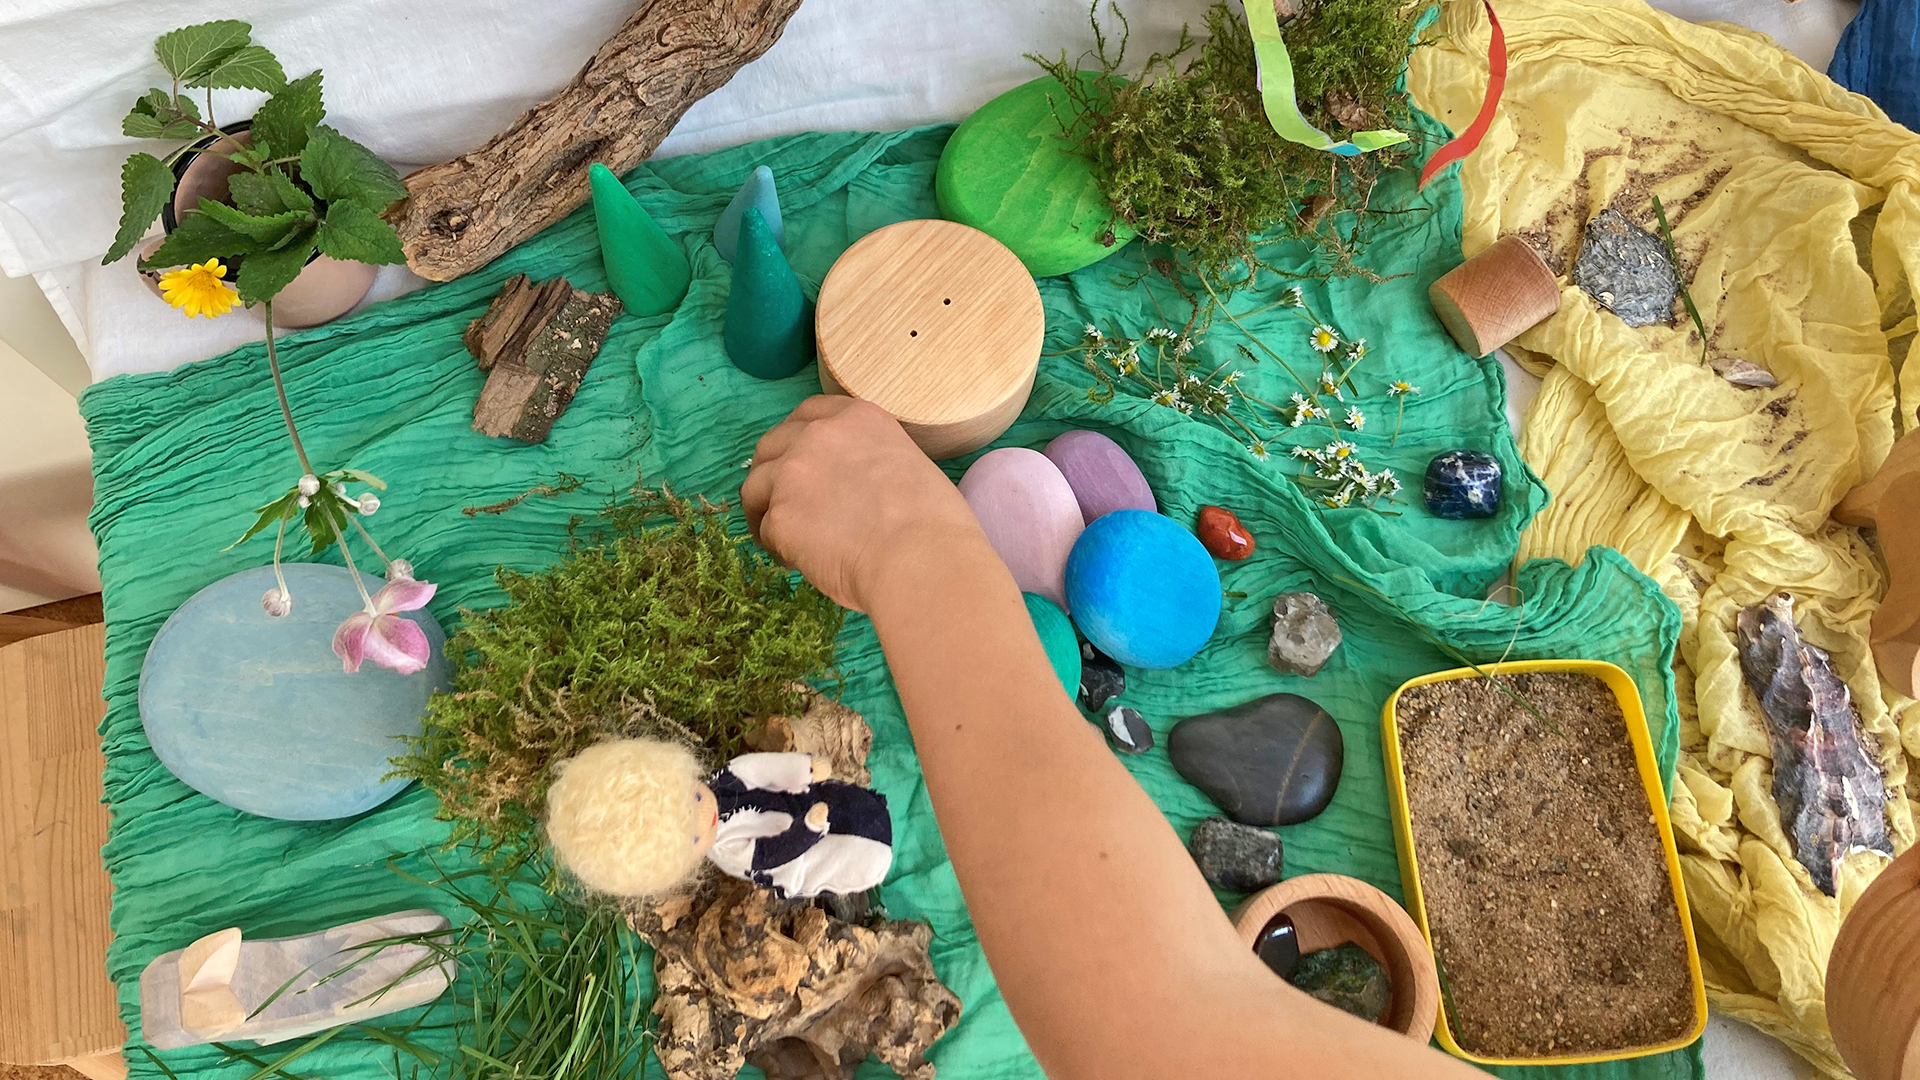 Colourfully decorated table with play materials and natural materials.